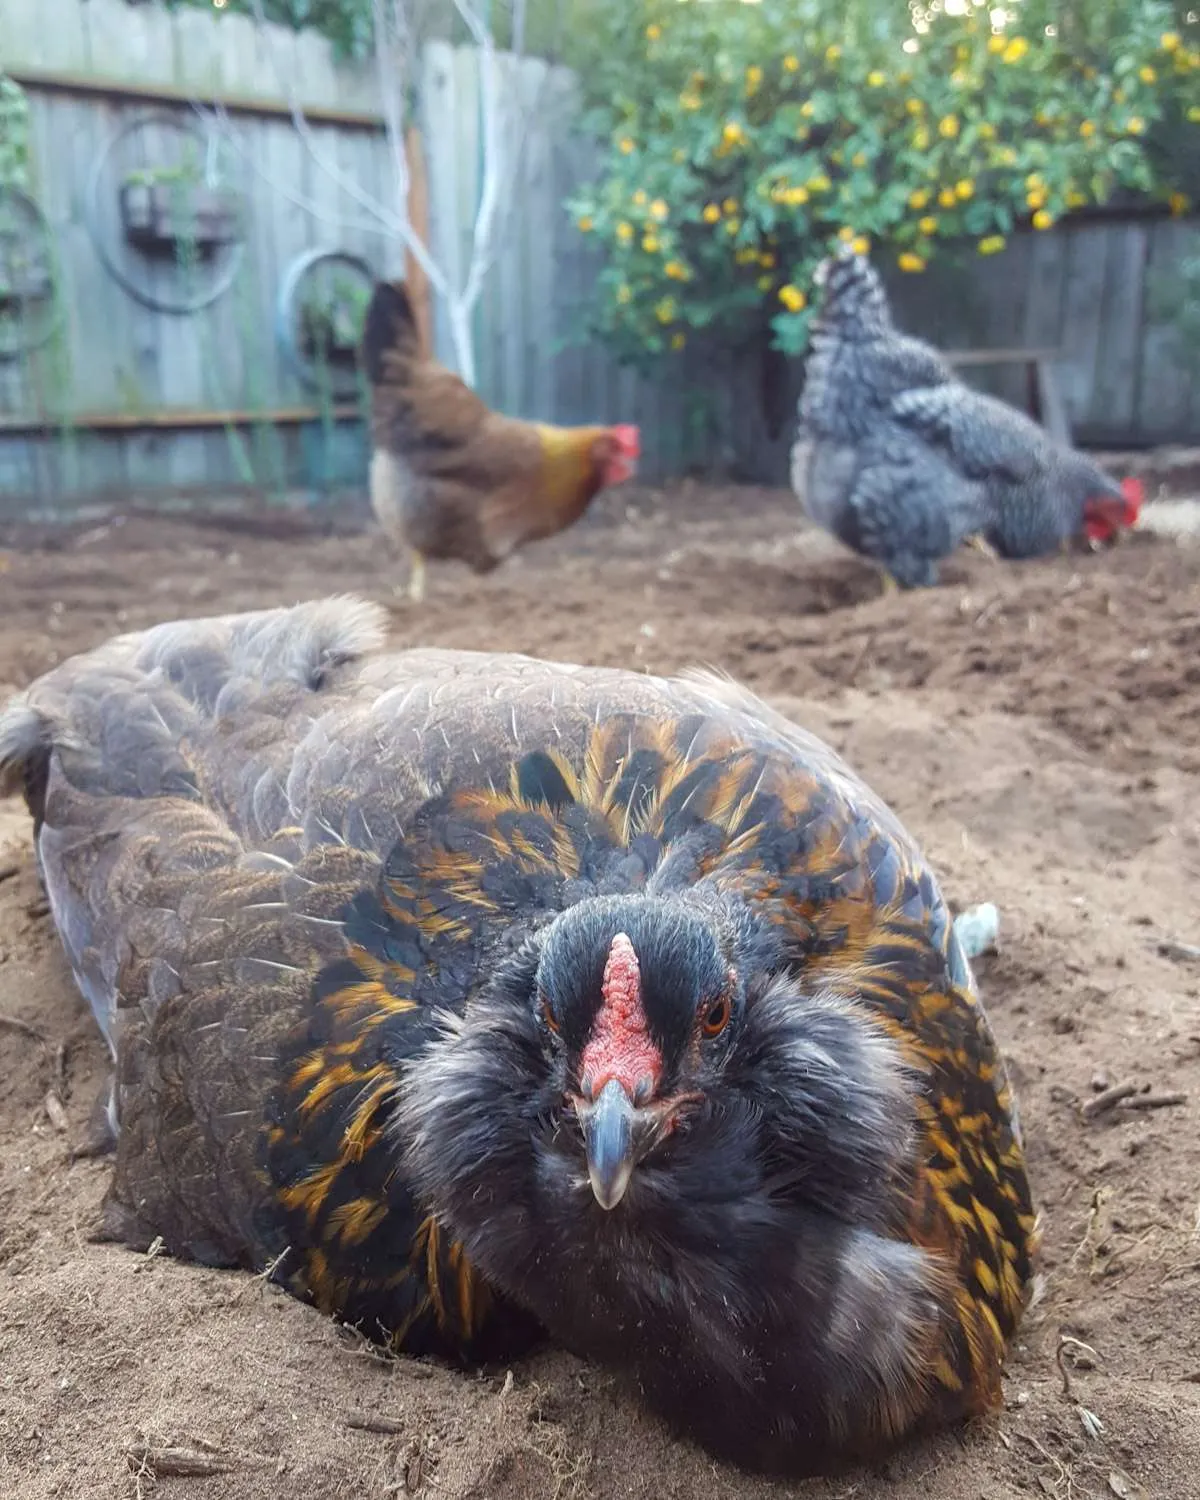 A close up image of an Easter egger chicken who is brown in color with a fluffy beard and cheeks. She is laying in dirt while two chickens in the background are pecking around, beyond that is a lemon tree full of bright yellow fruit. 